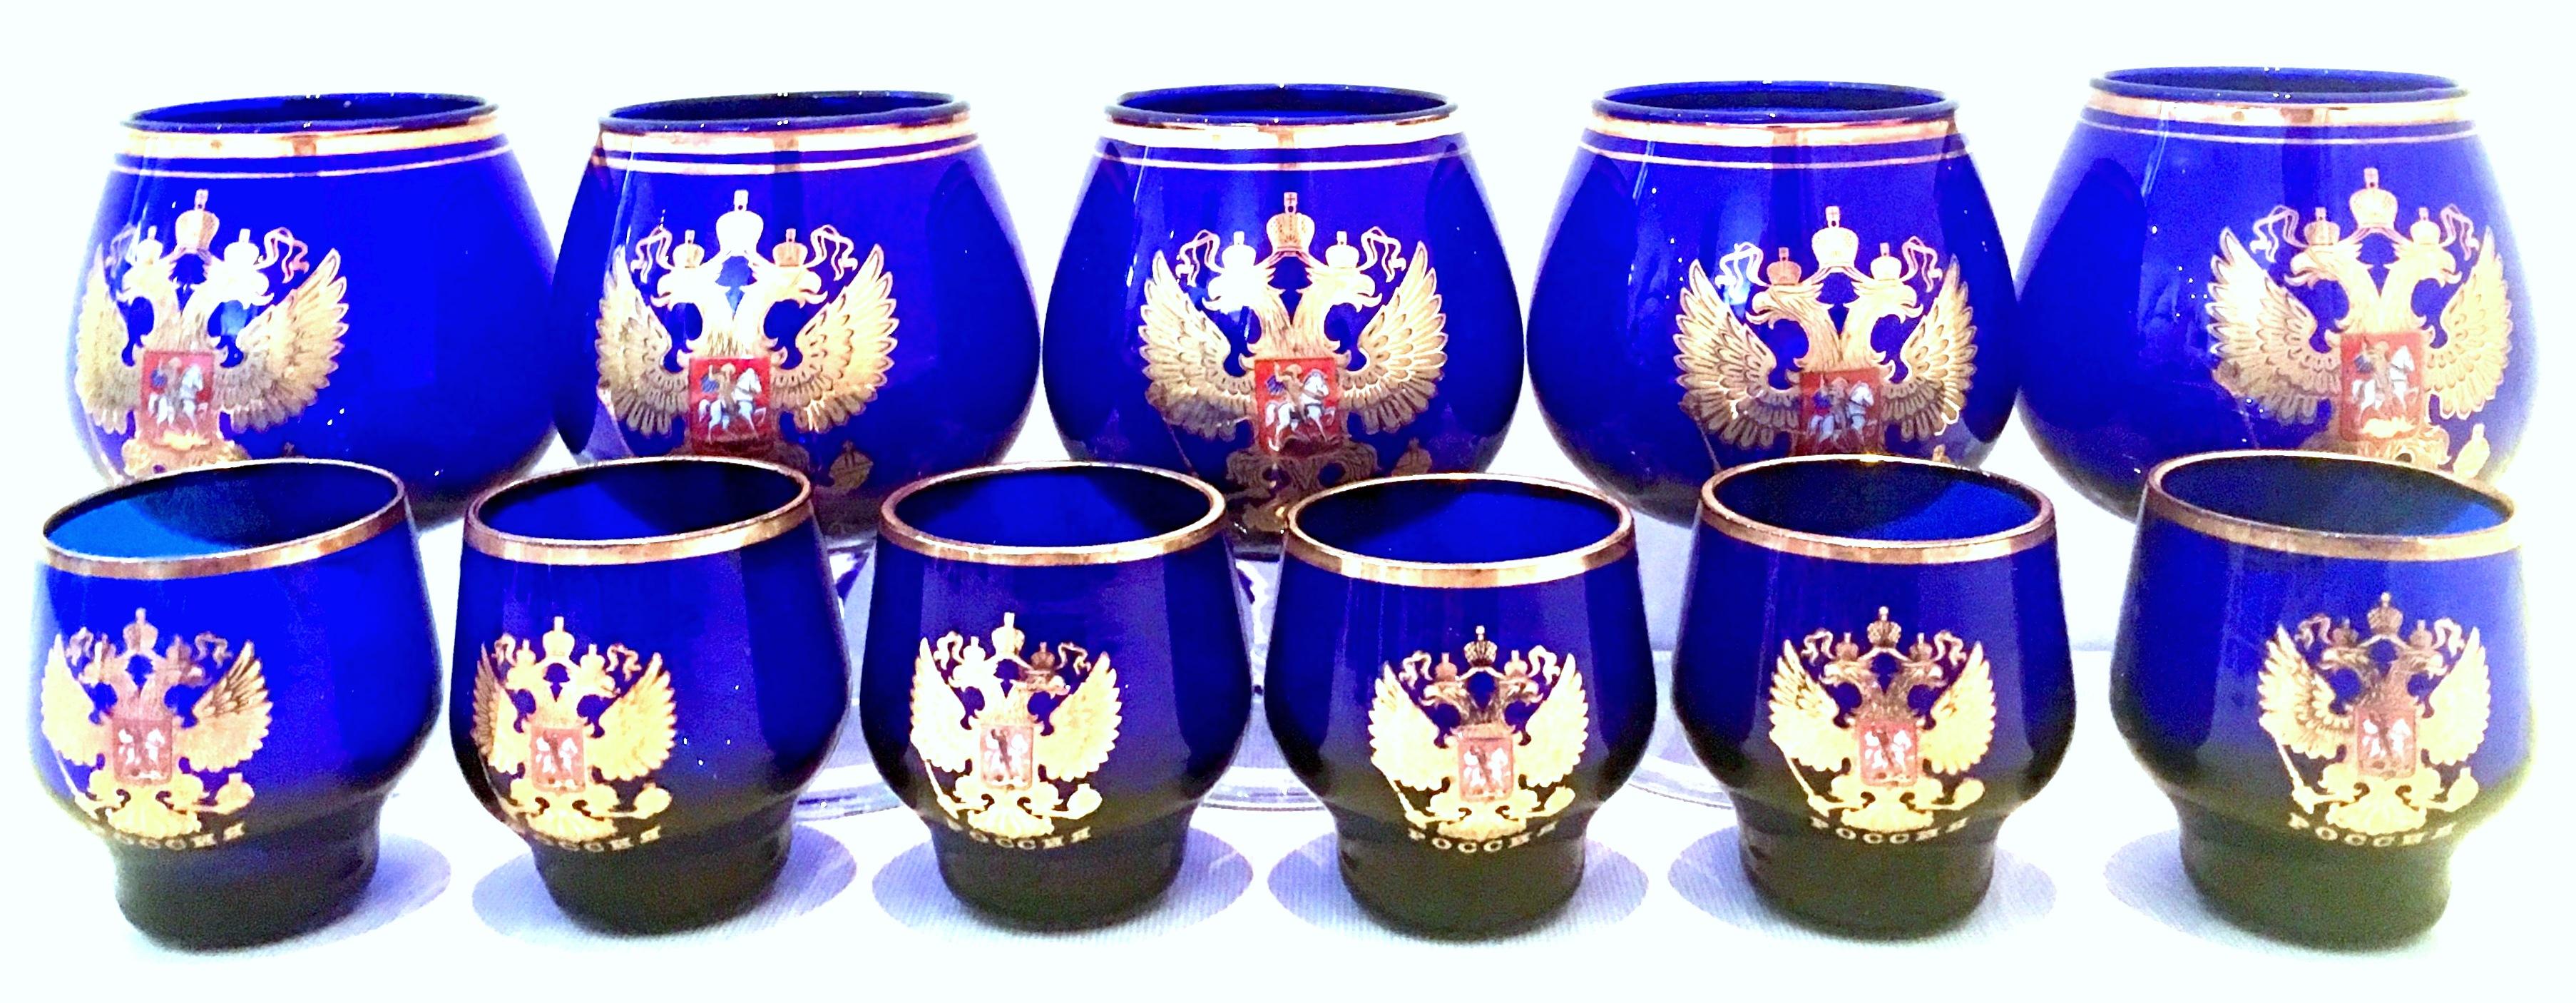 Mid-20th Century Cobalt & 22K Gold Coat Of Arms Bohemia Glass Drinks Set Of Eleven Pieces. Set includes, five brandy stem glasses and six rocks glasses.
Rocks Glass measures, 2.25